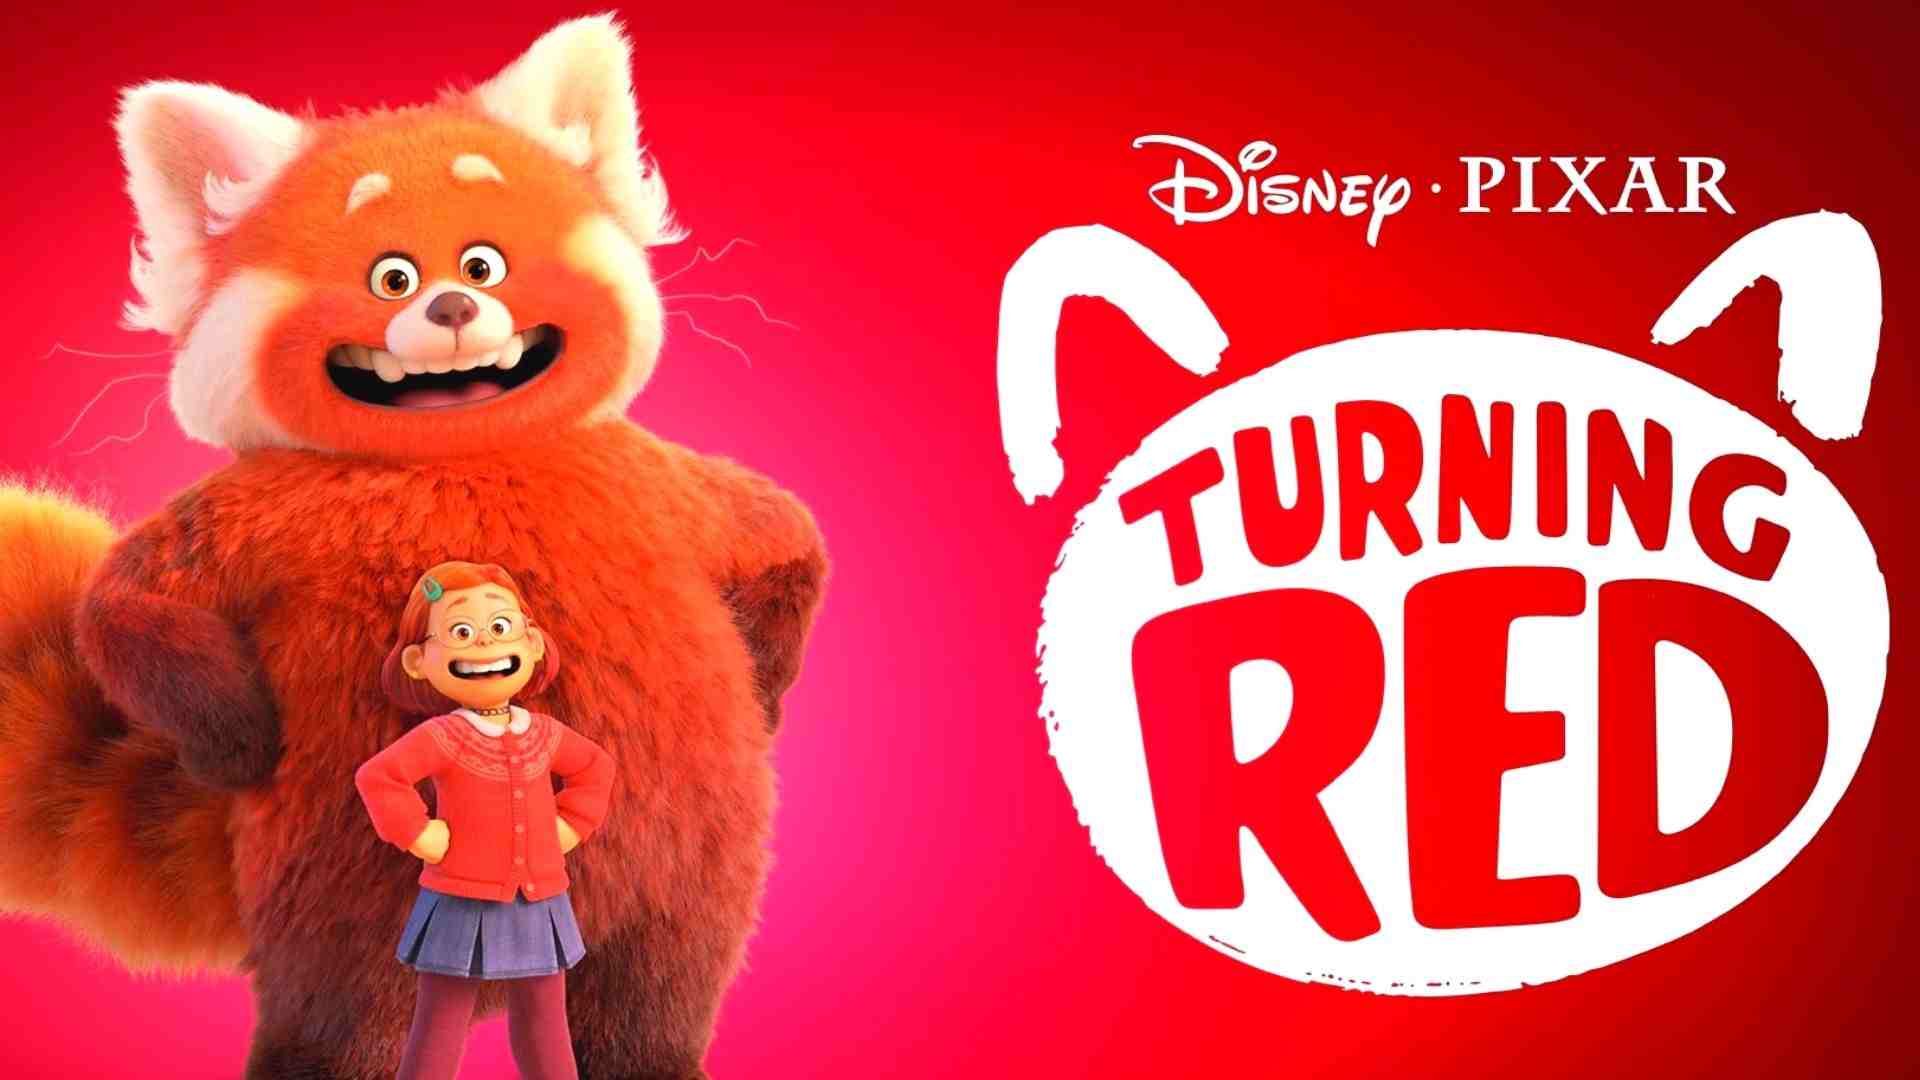 Turning red Wallpaper and images